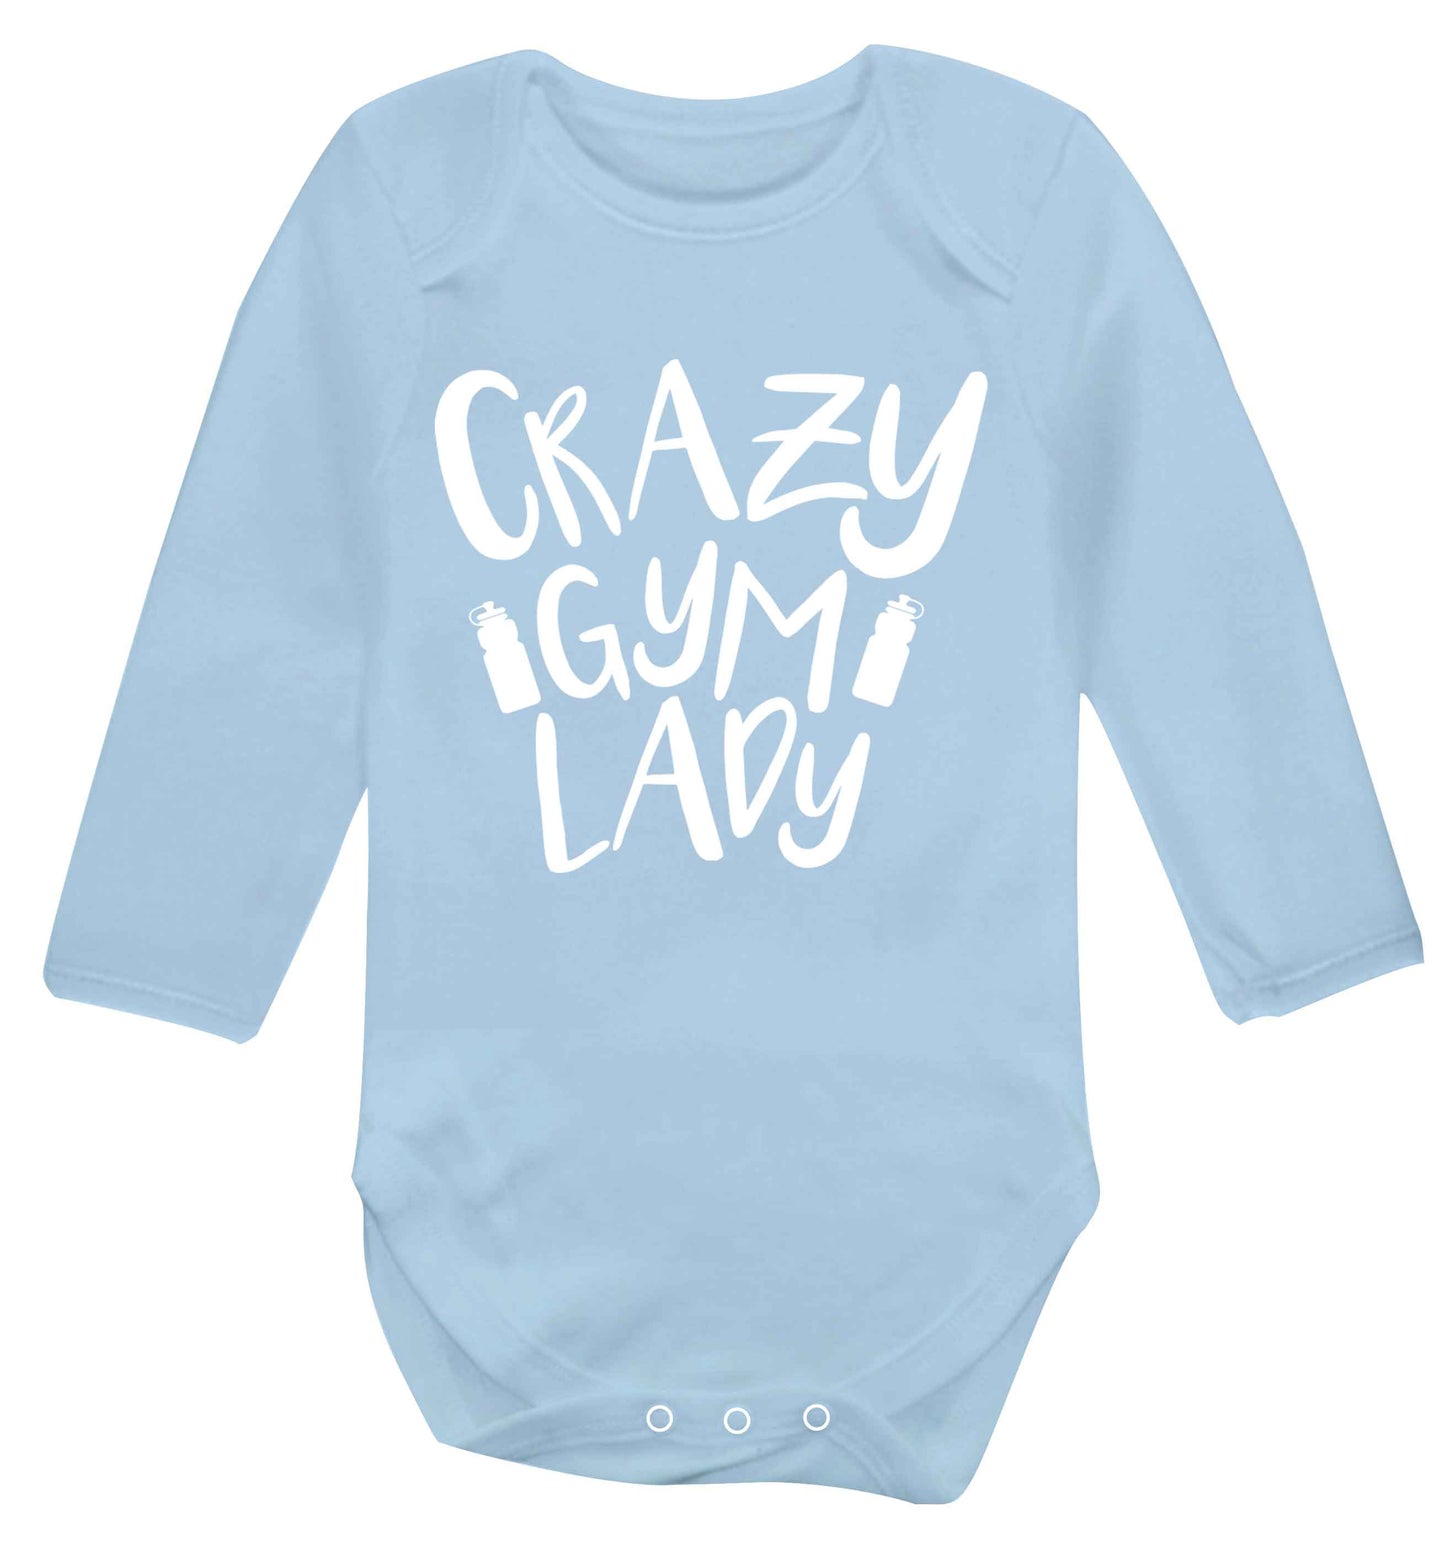 Crazy gym lady Baby Vest long sleeved pale blue 6-12 months